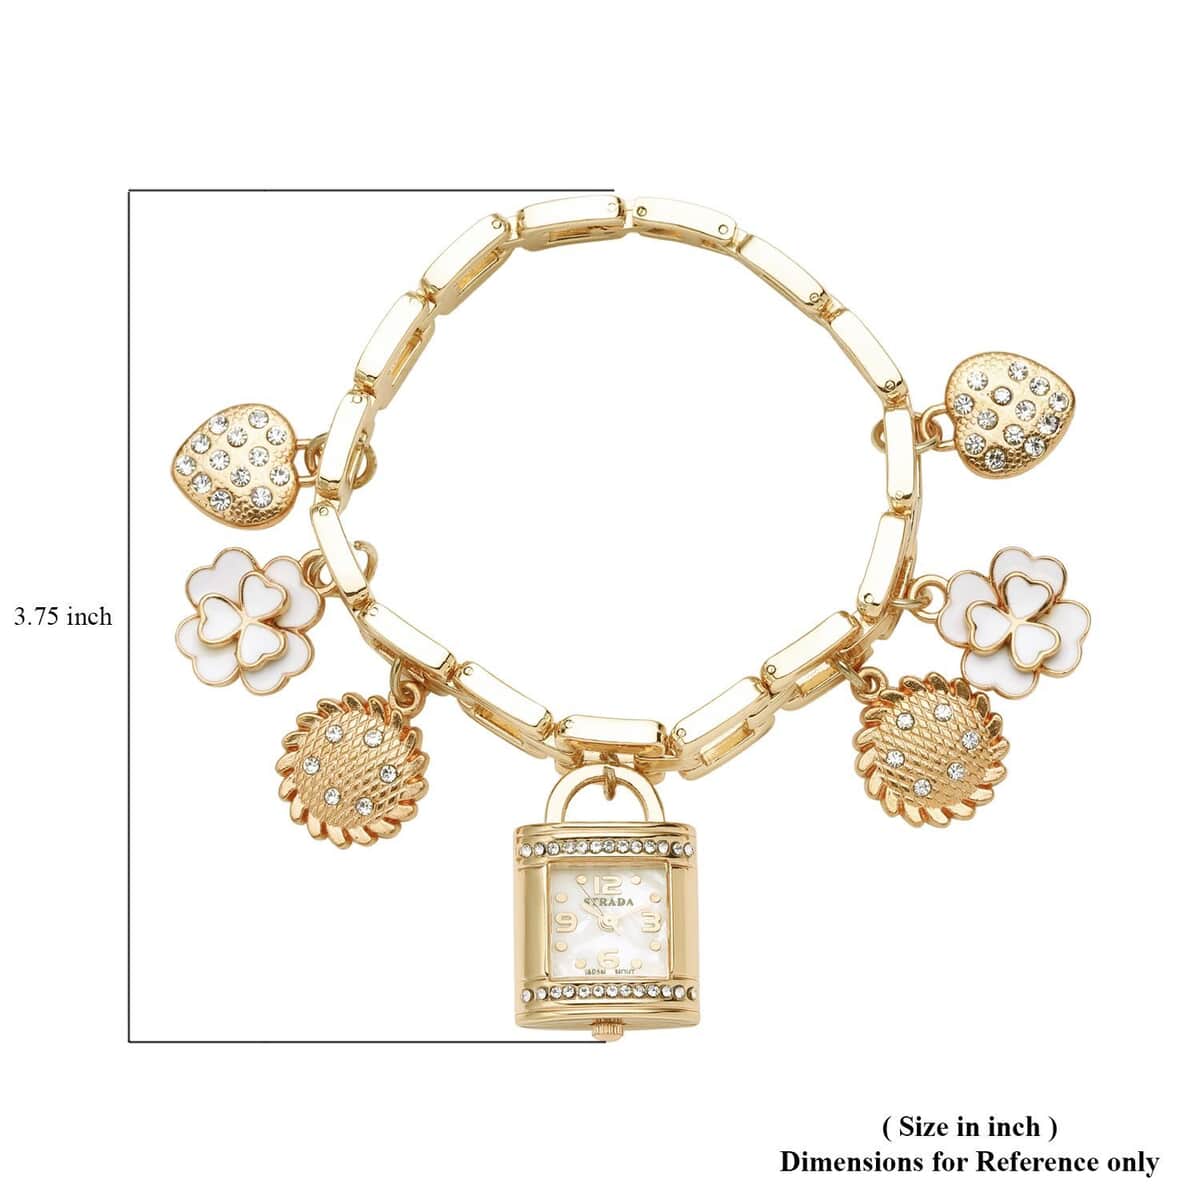 Strada Japanese Movement White Austrian Crystal Multi-Charm Bracelet Watch in Goldtone (up to 8 Inches) image number 4